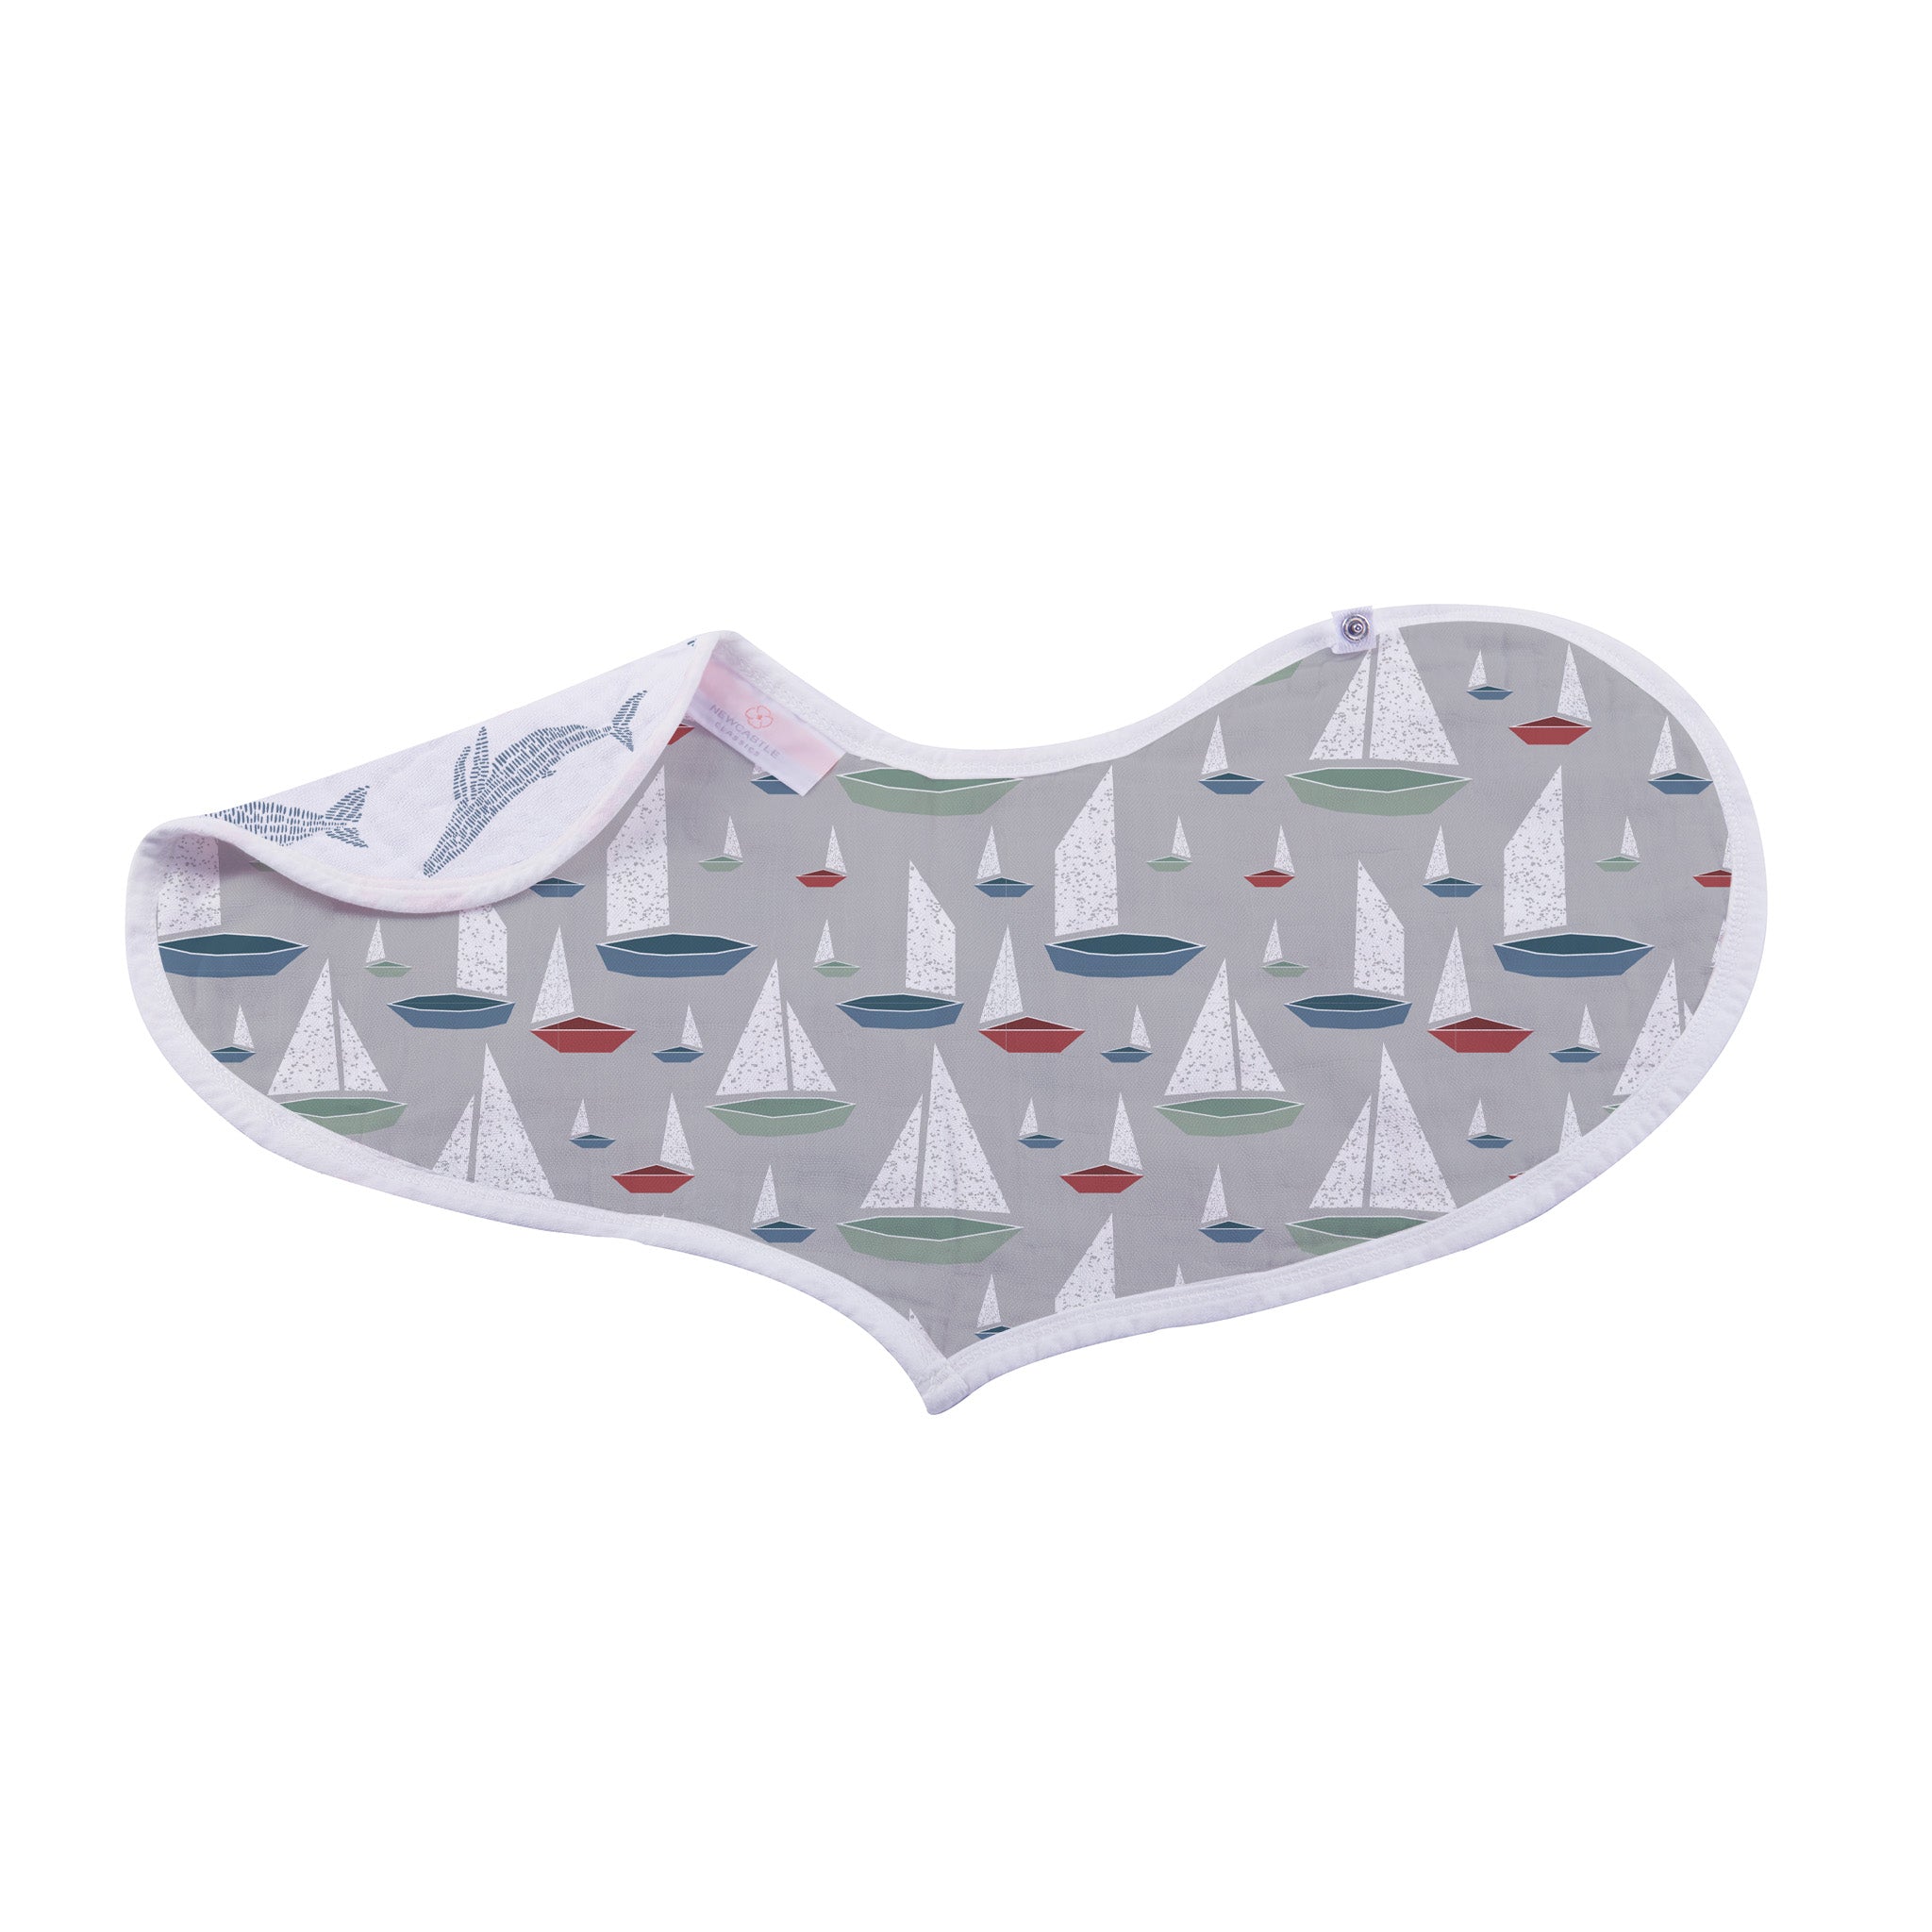 Reversible heart bib with whales and sails